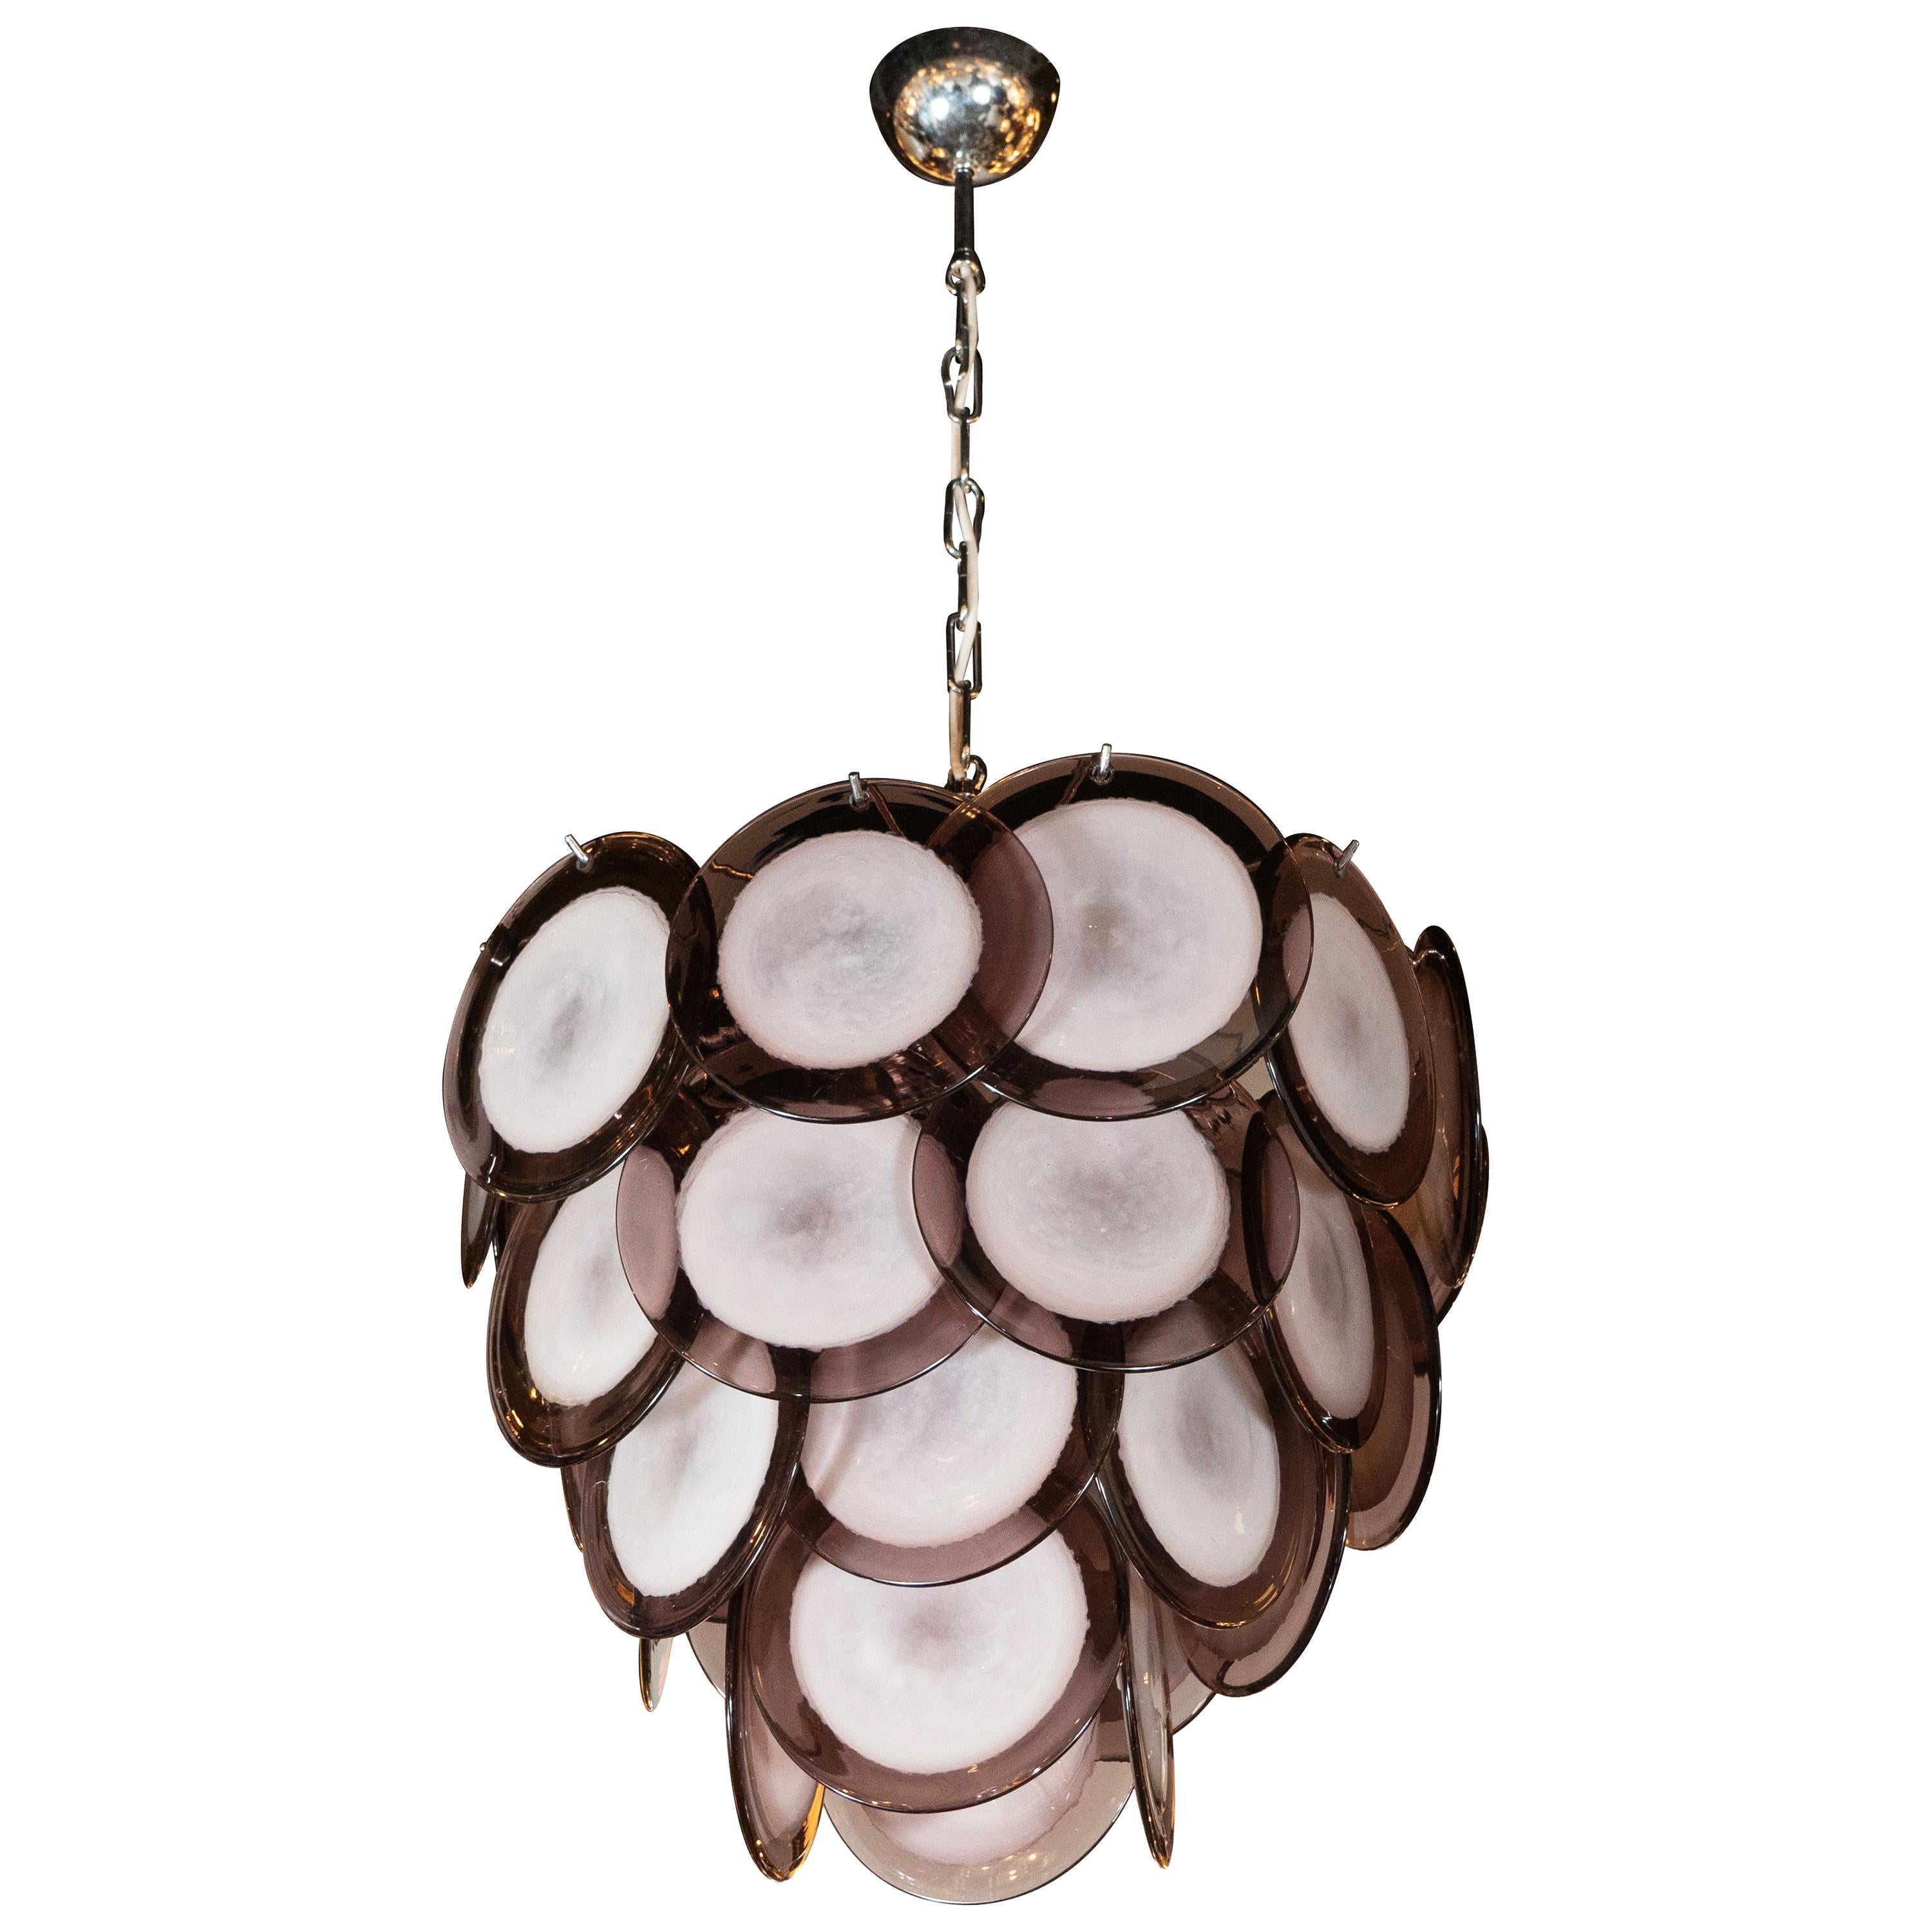 Modernist Amethyst Handblown Murano Glass Disc Chandelier with Chrome Fittings